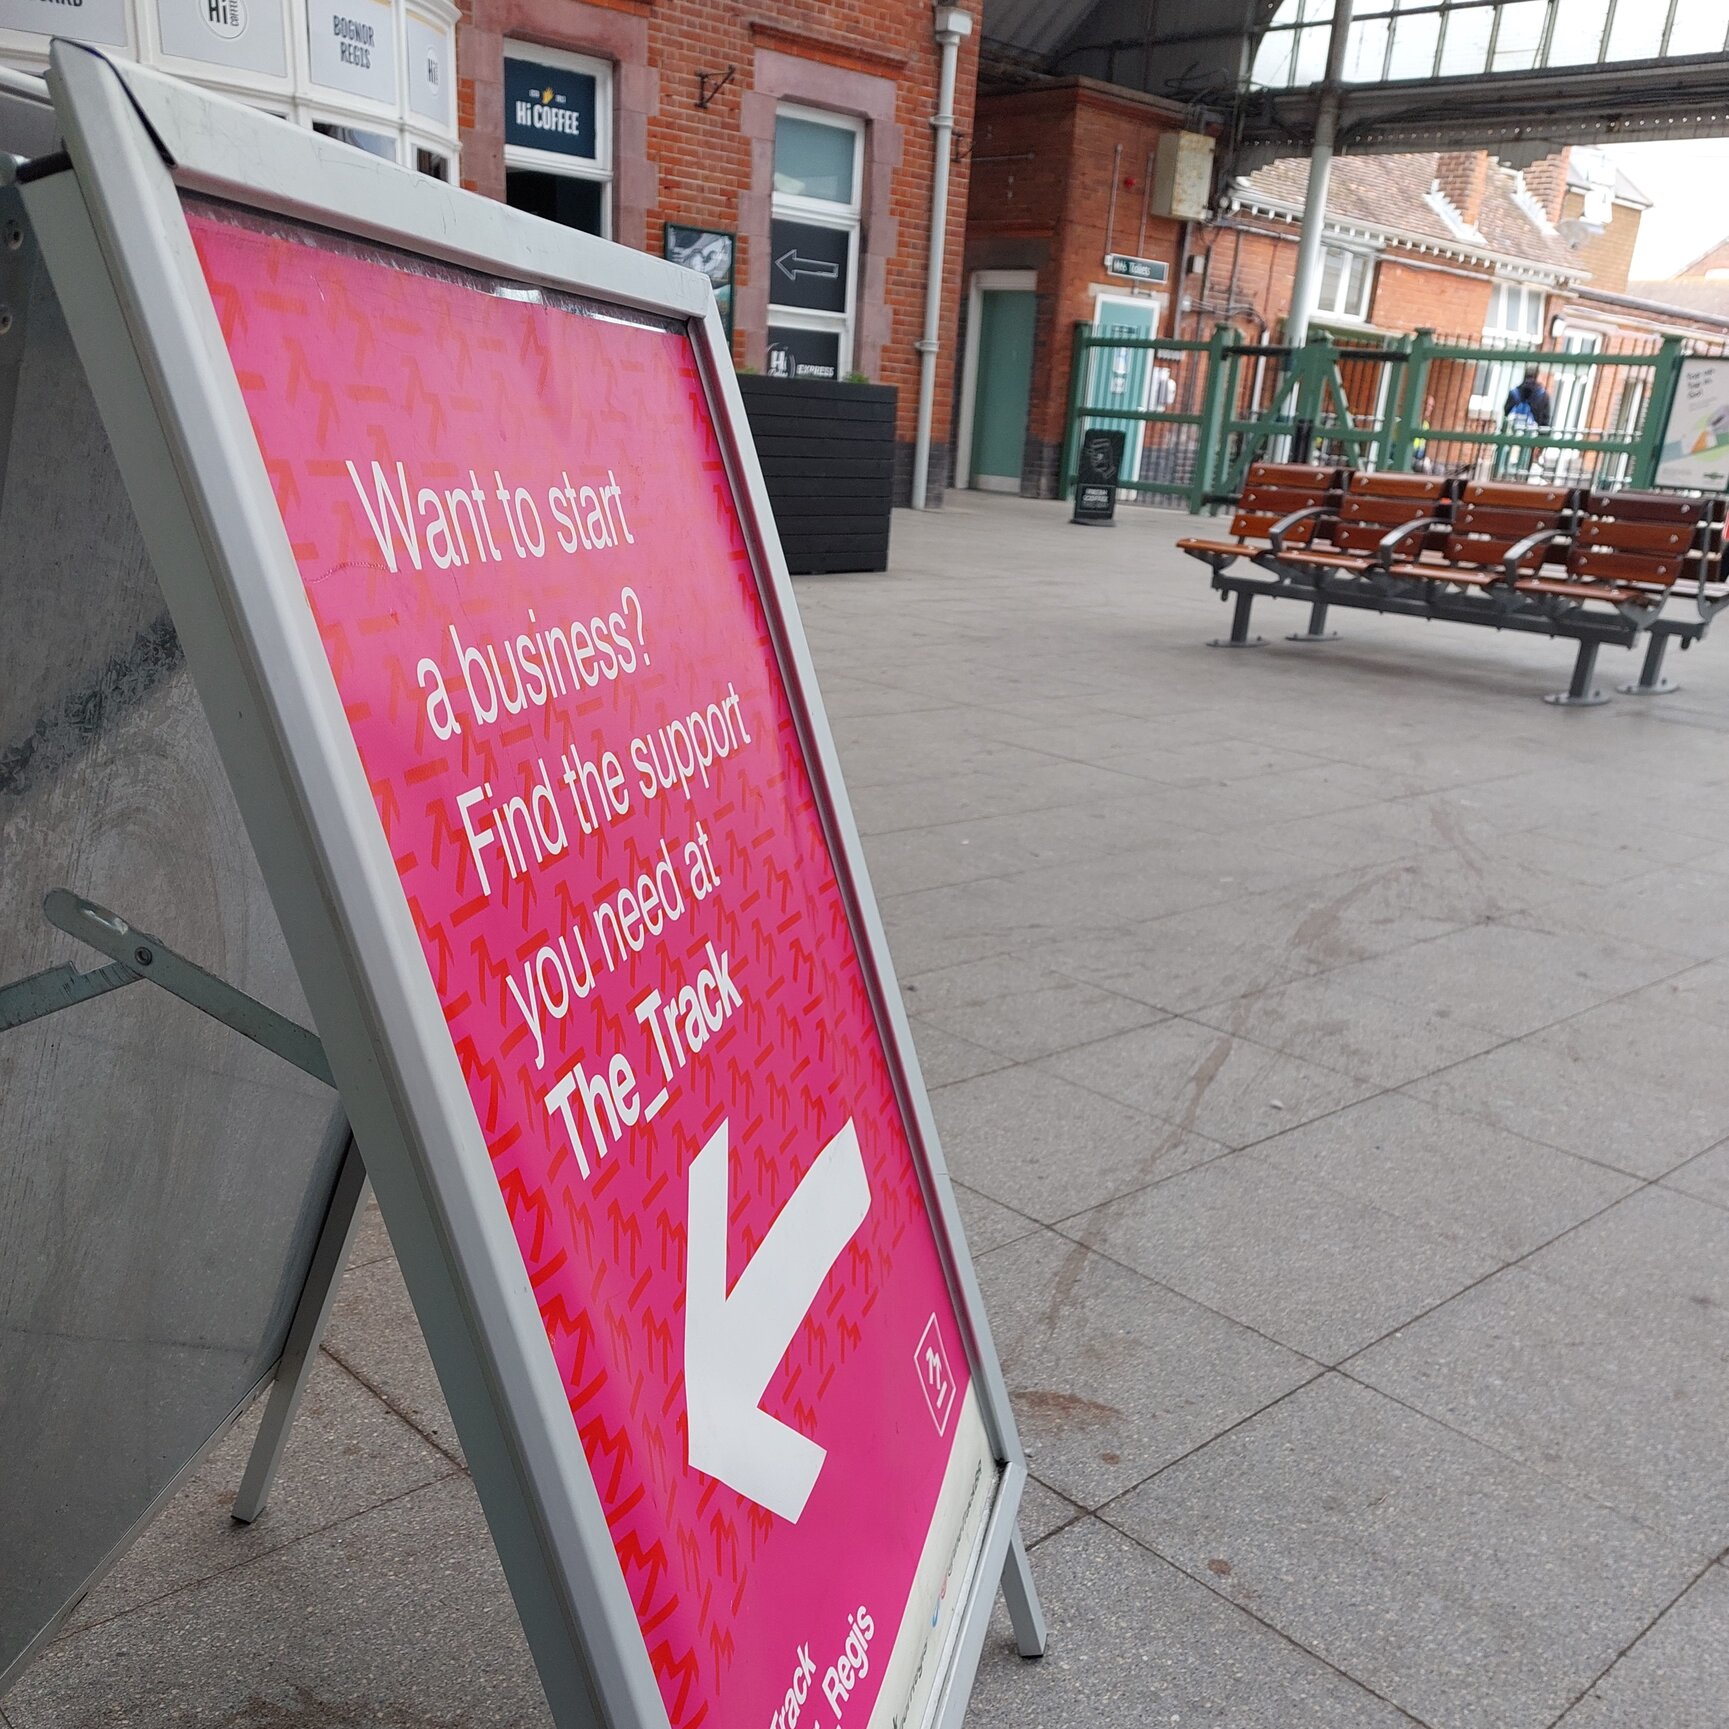 The_Track's bright pink A-frame sign which is standing in Bognor Regis Train Station. The frame reads "Want to start a business? Find the support you need at The_Track"